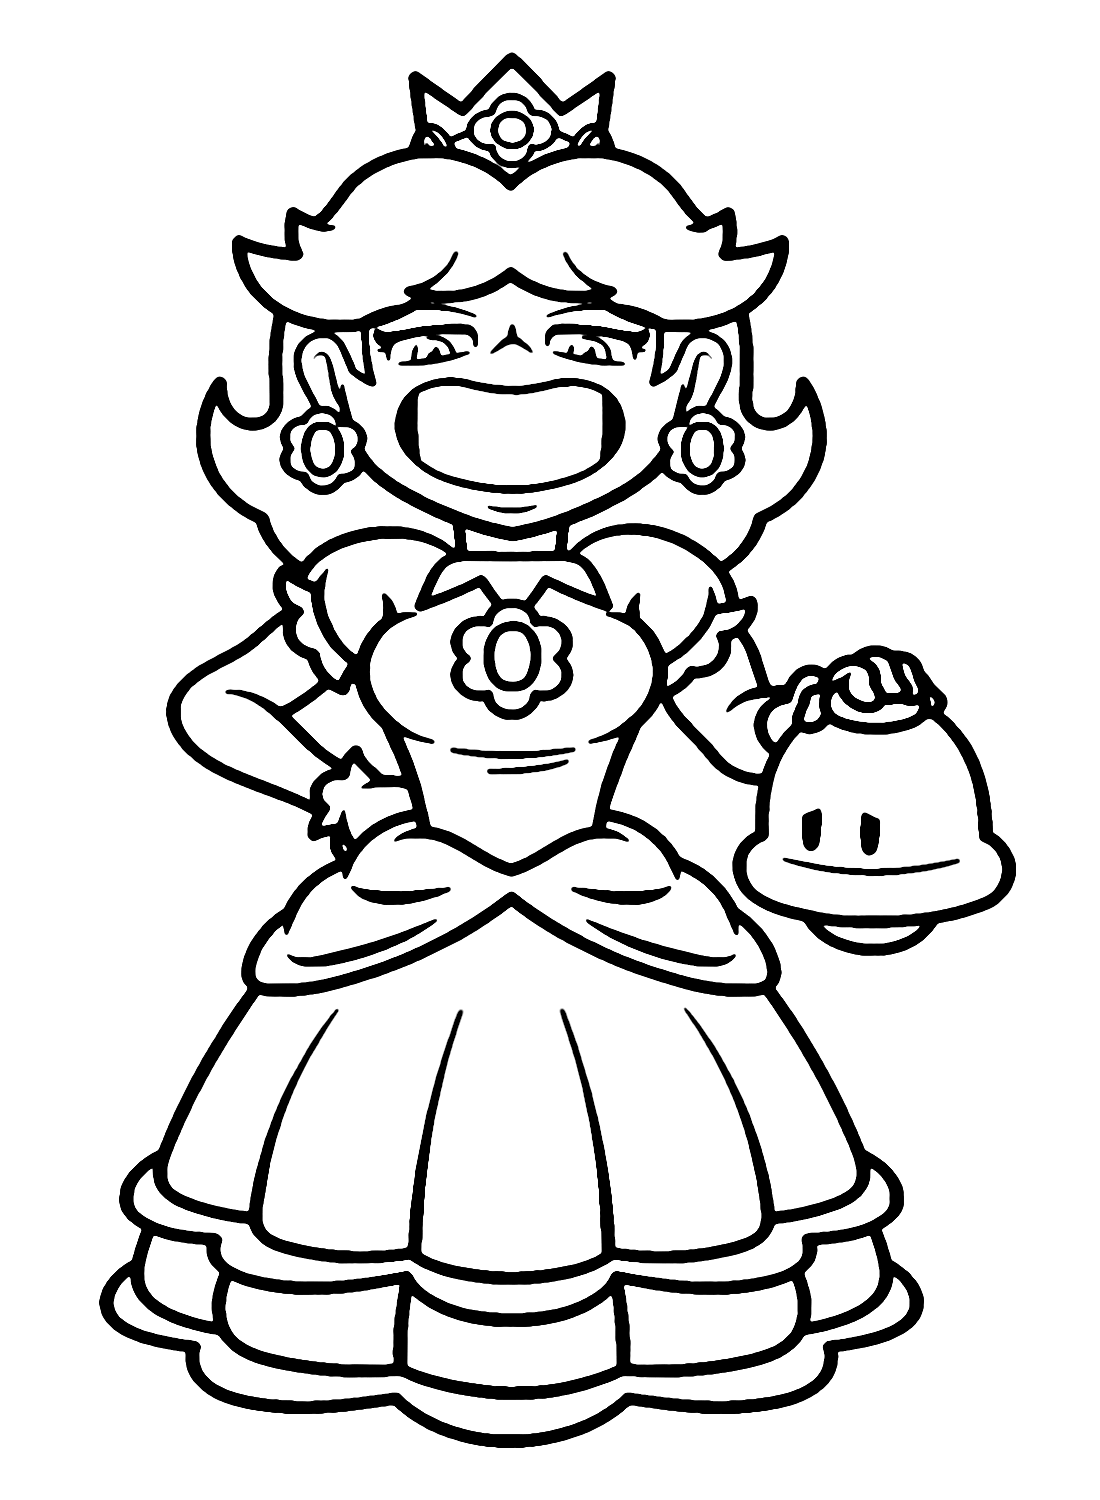 Funny Princess Daisy Coloring Pages